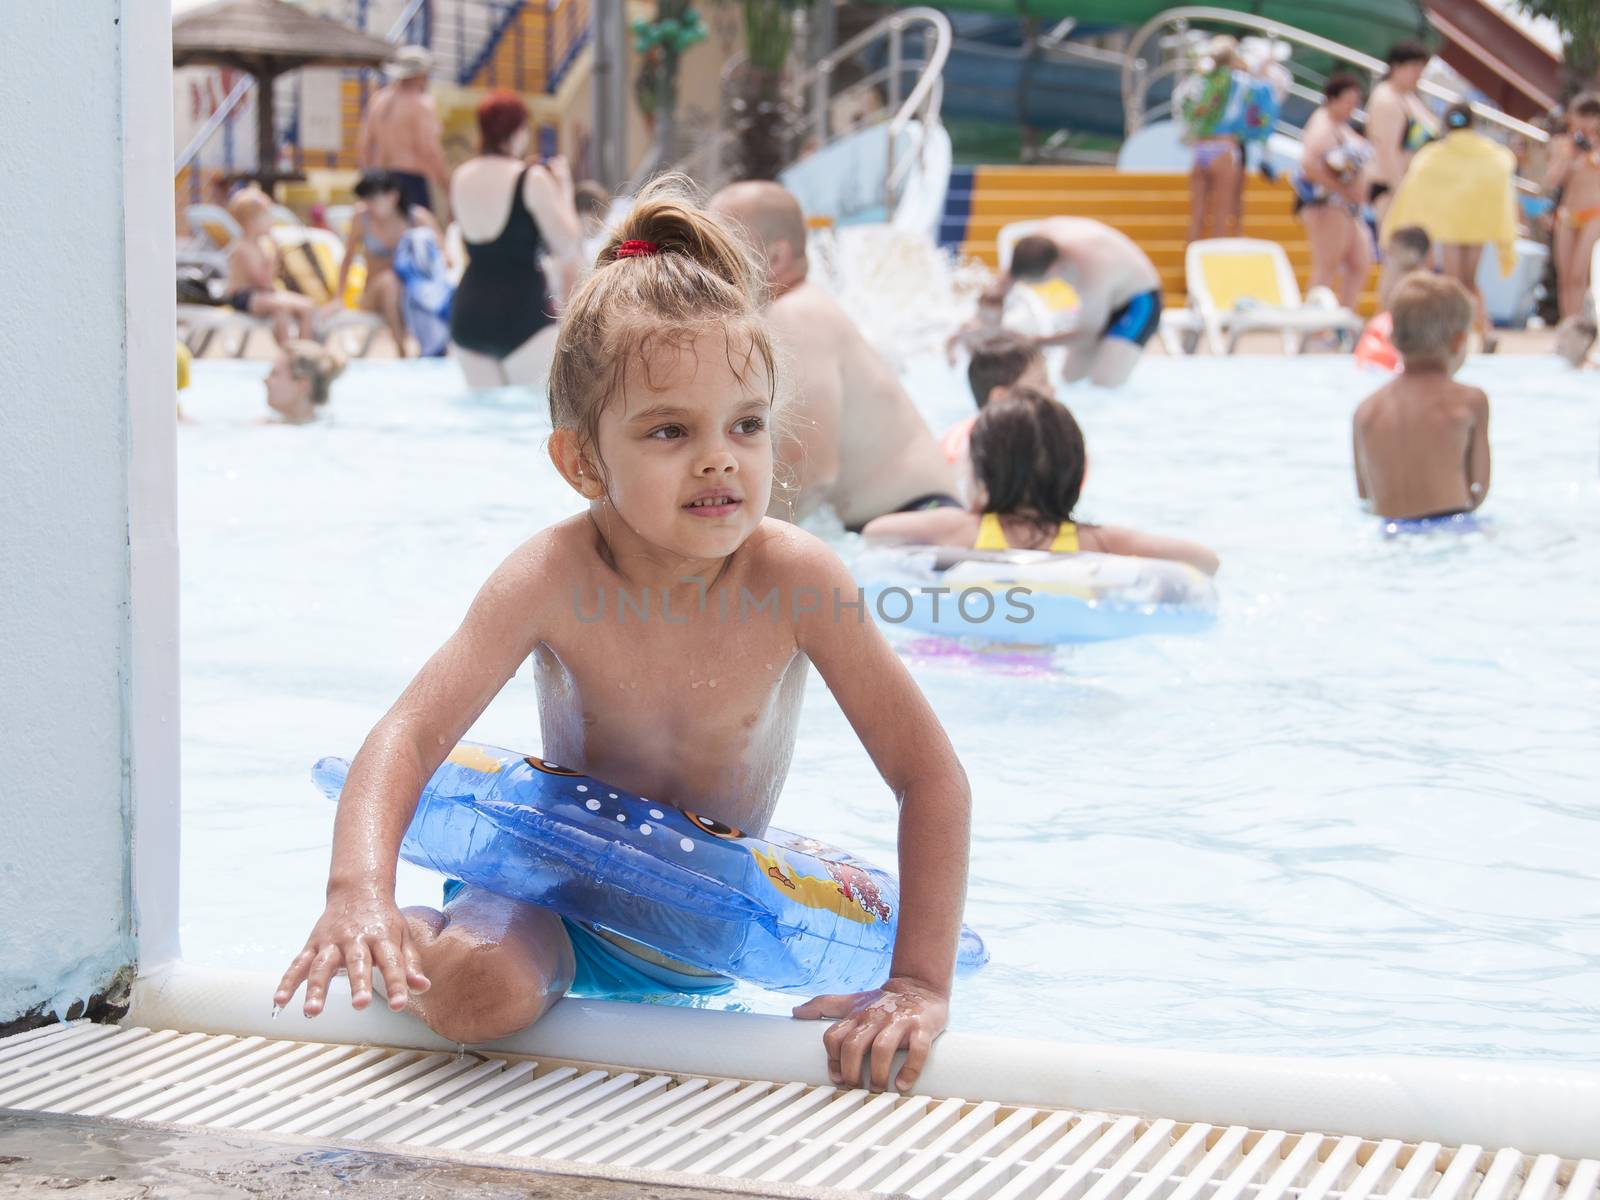 Four-year-old girl gets out pool with tterms of by Madhourse